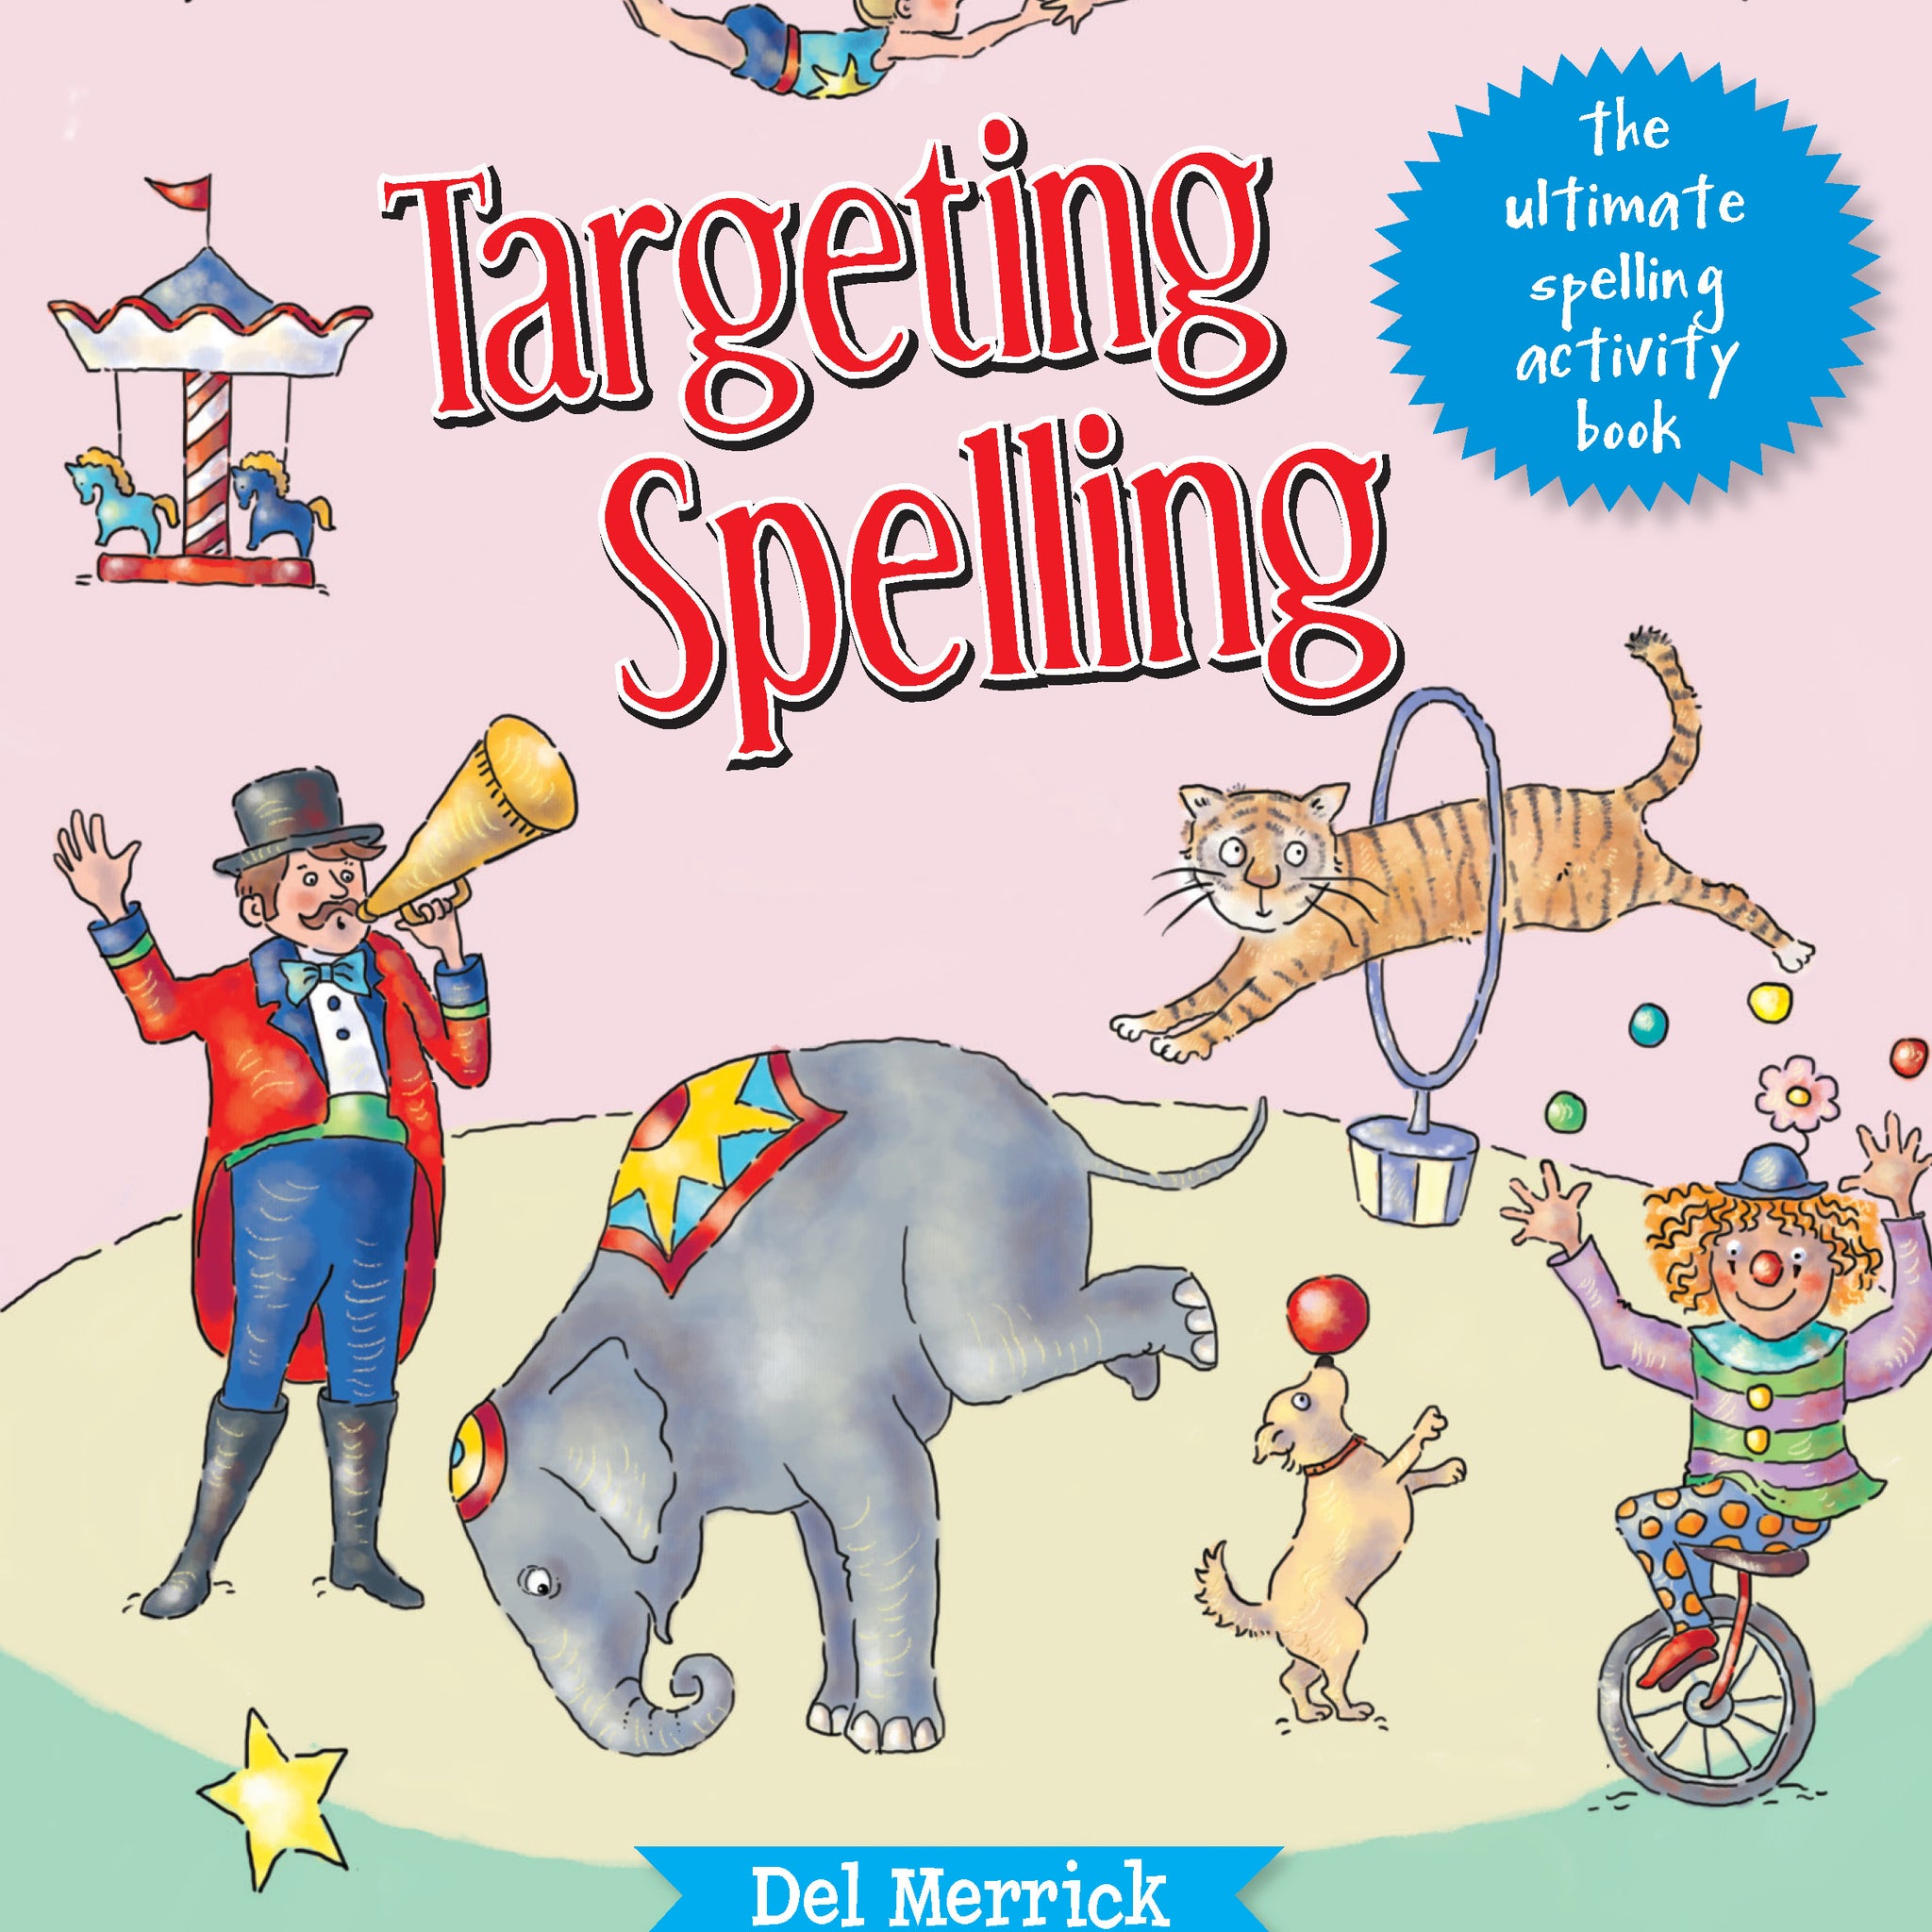 Targeting Spelling Activity Book Year 2